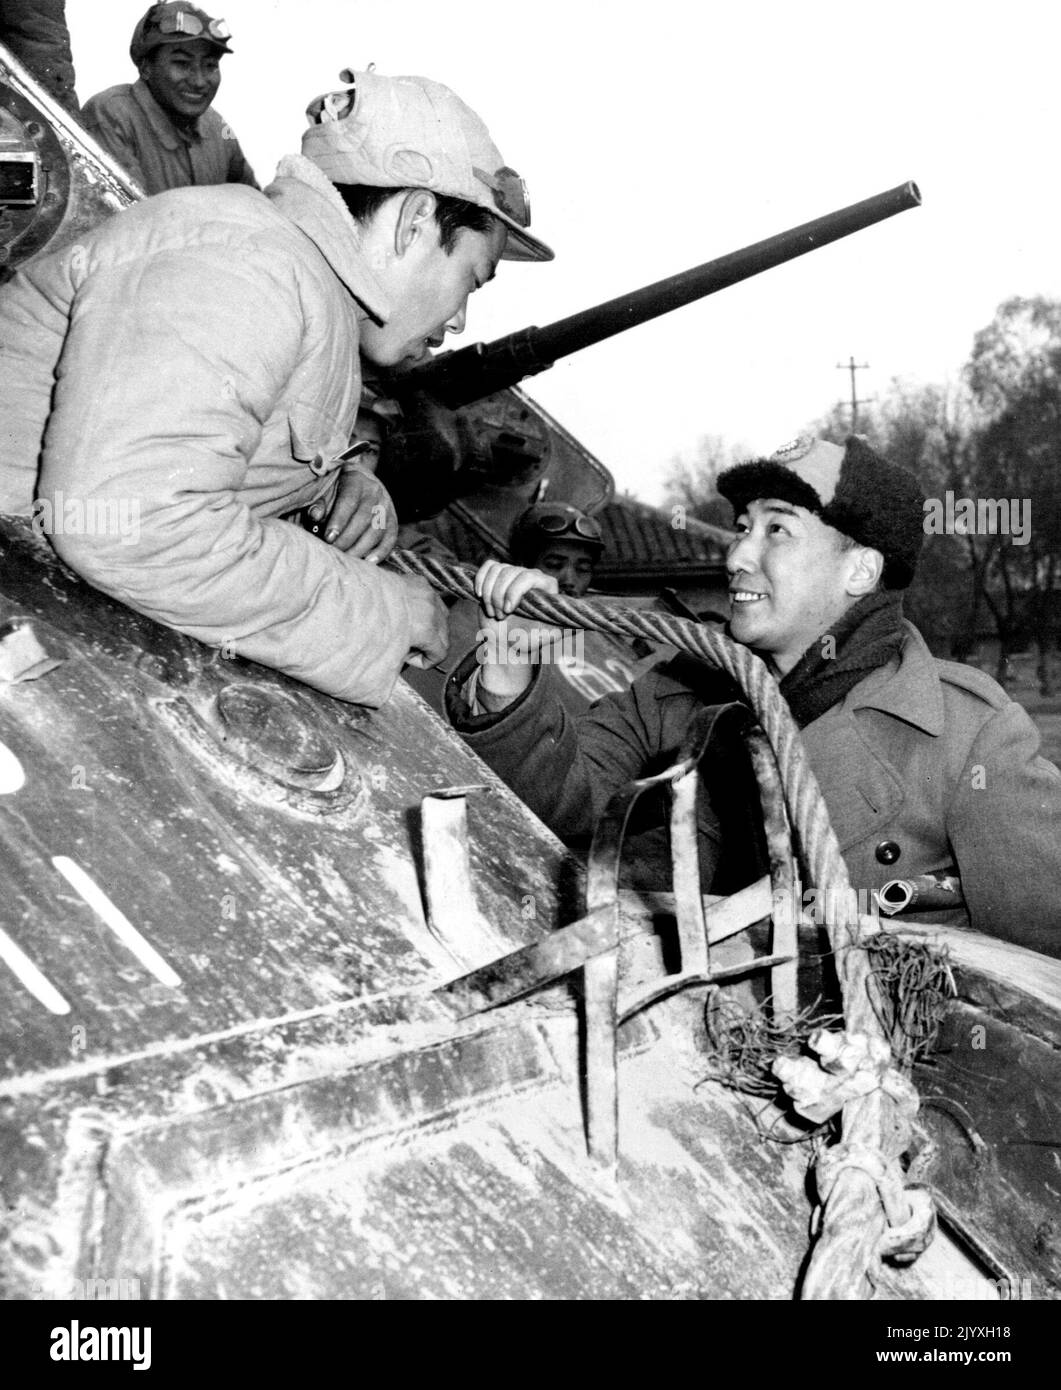 Chiang's Son May Be Tapped - Col. Chiang Ching-Kuo, son of Generalissimo Chiang Kai-Shek, may be among 250,000 nationalist troops trapped in Suchow. A tank corps commander, he is shown (right) talking to a veteran during recent suchow action. August 12, 1948. (Photo by ACME Photo). Stock Photo